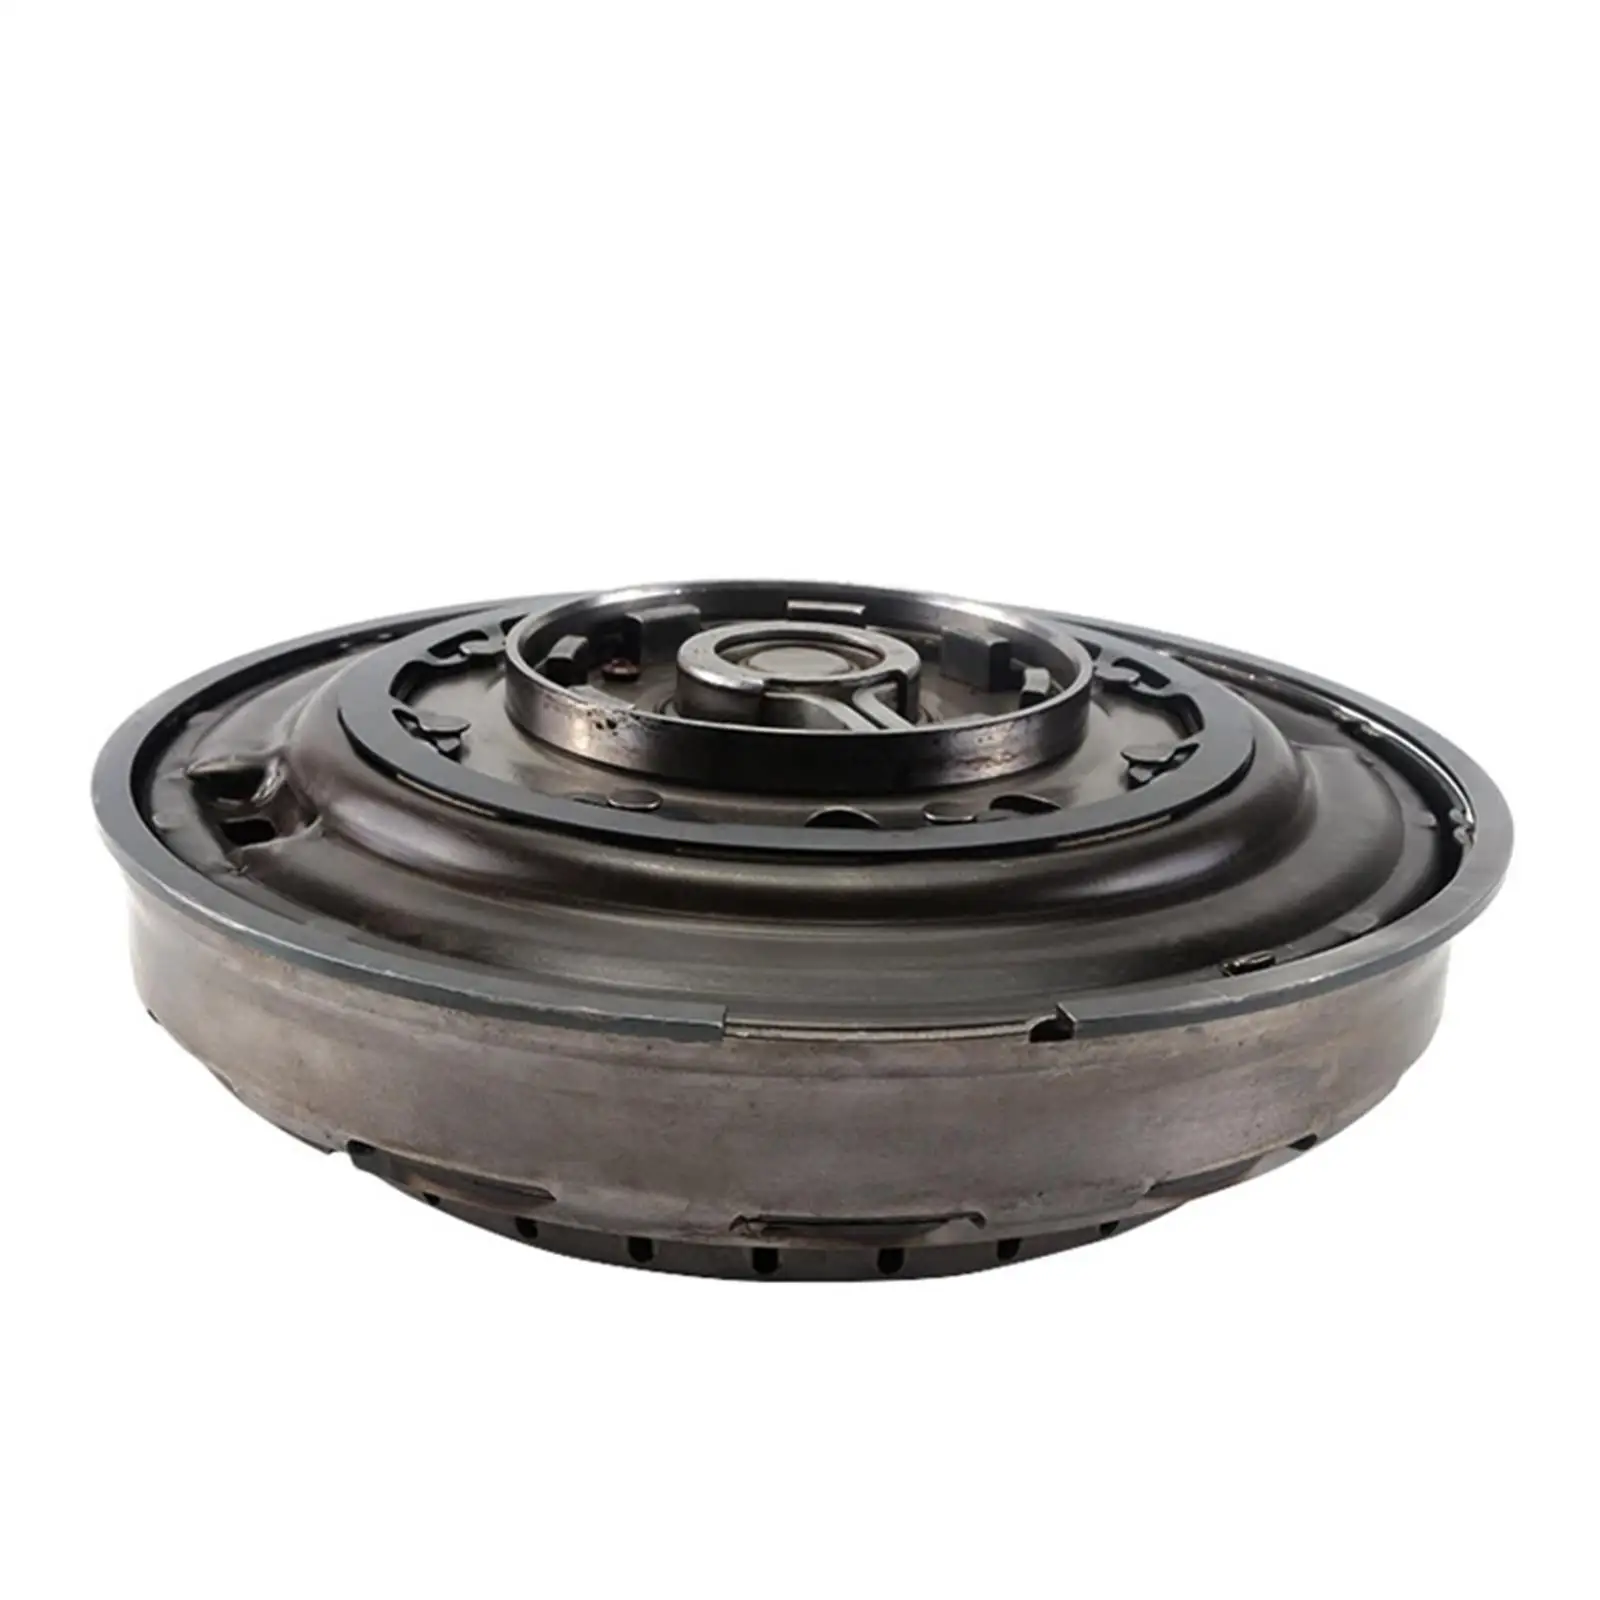 Transmission Clutch Replacement Accessory Spare Parts Durable Practical Portable Easy to Install Mps6 6Dct450 for Volvo